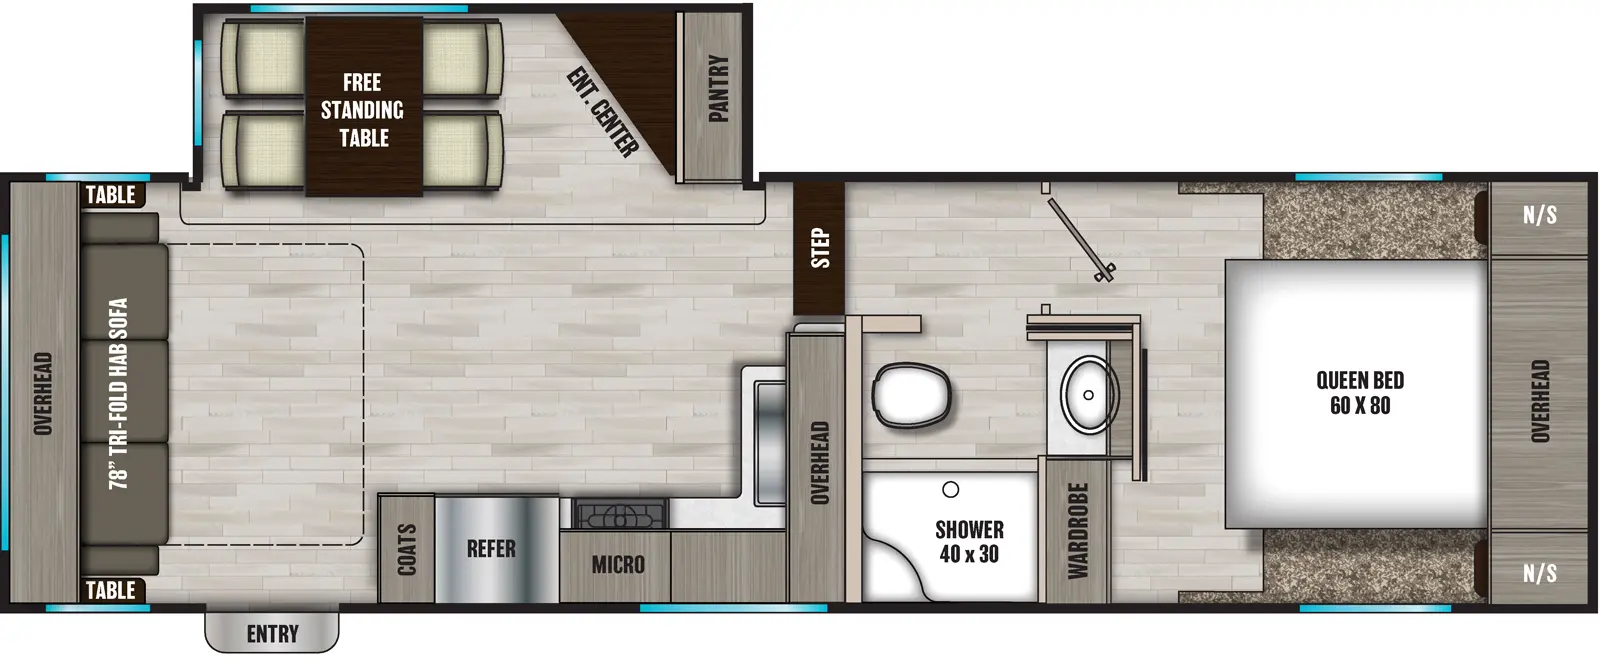 The 254RLS has one slideout and one entry. Interior layout front to back: foot-facing queen bed with overhead cabinet and nightstands on each side, and a door side wardrobe; door side full bathroom; steps down to main living area on off-door side; off-door side slideout with pantry, angled entertainment center, and free-standing dinette; kitchen counter with sink and overhead cabinet wraps from inner wall to door side with microwave, cooktop, refrigerator, coat closet, and entry; rear tri-fold sofa with overhead cabinet, and tables on each side.